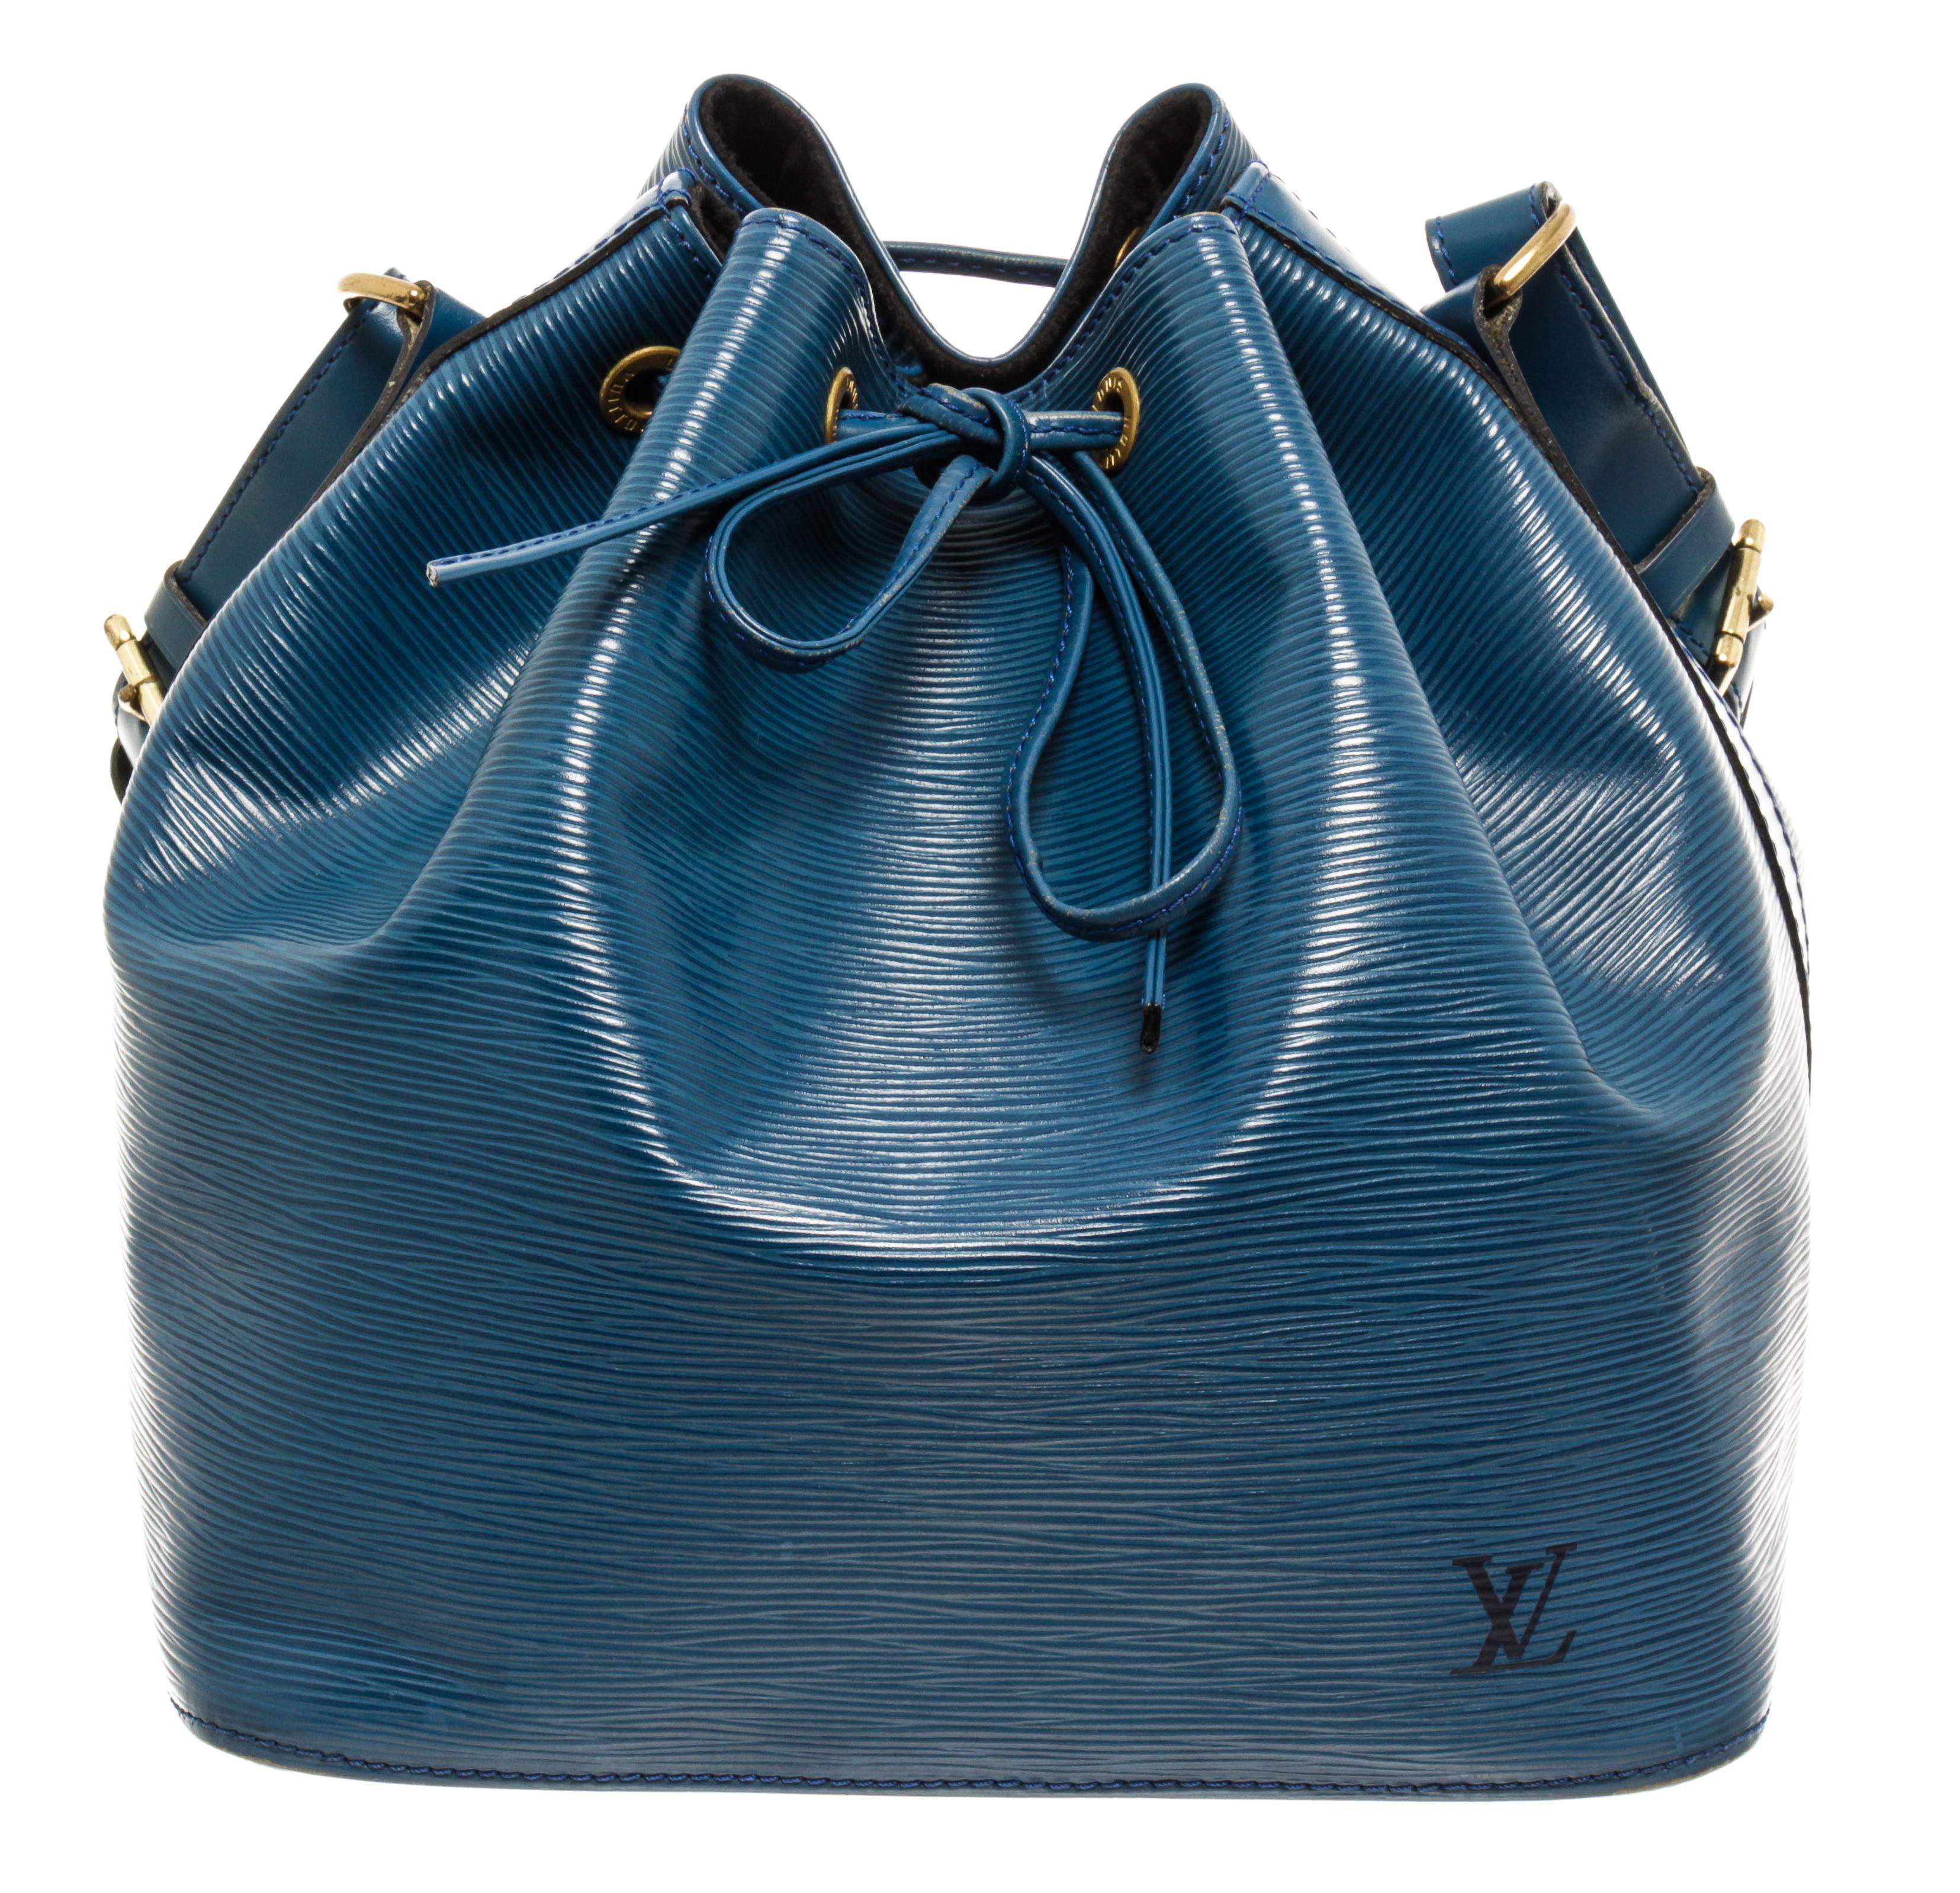 Louis Vuitton Blue Epi Leather Noe PM with adjustable shoulder strap, suede lining, gold tone hardware and drawstring closure.

76922MSC